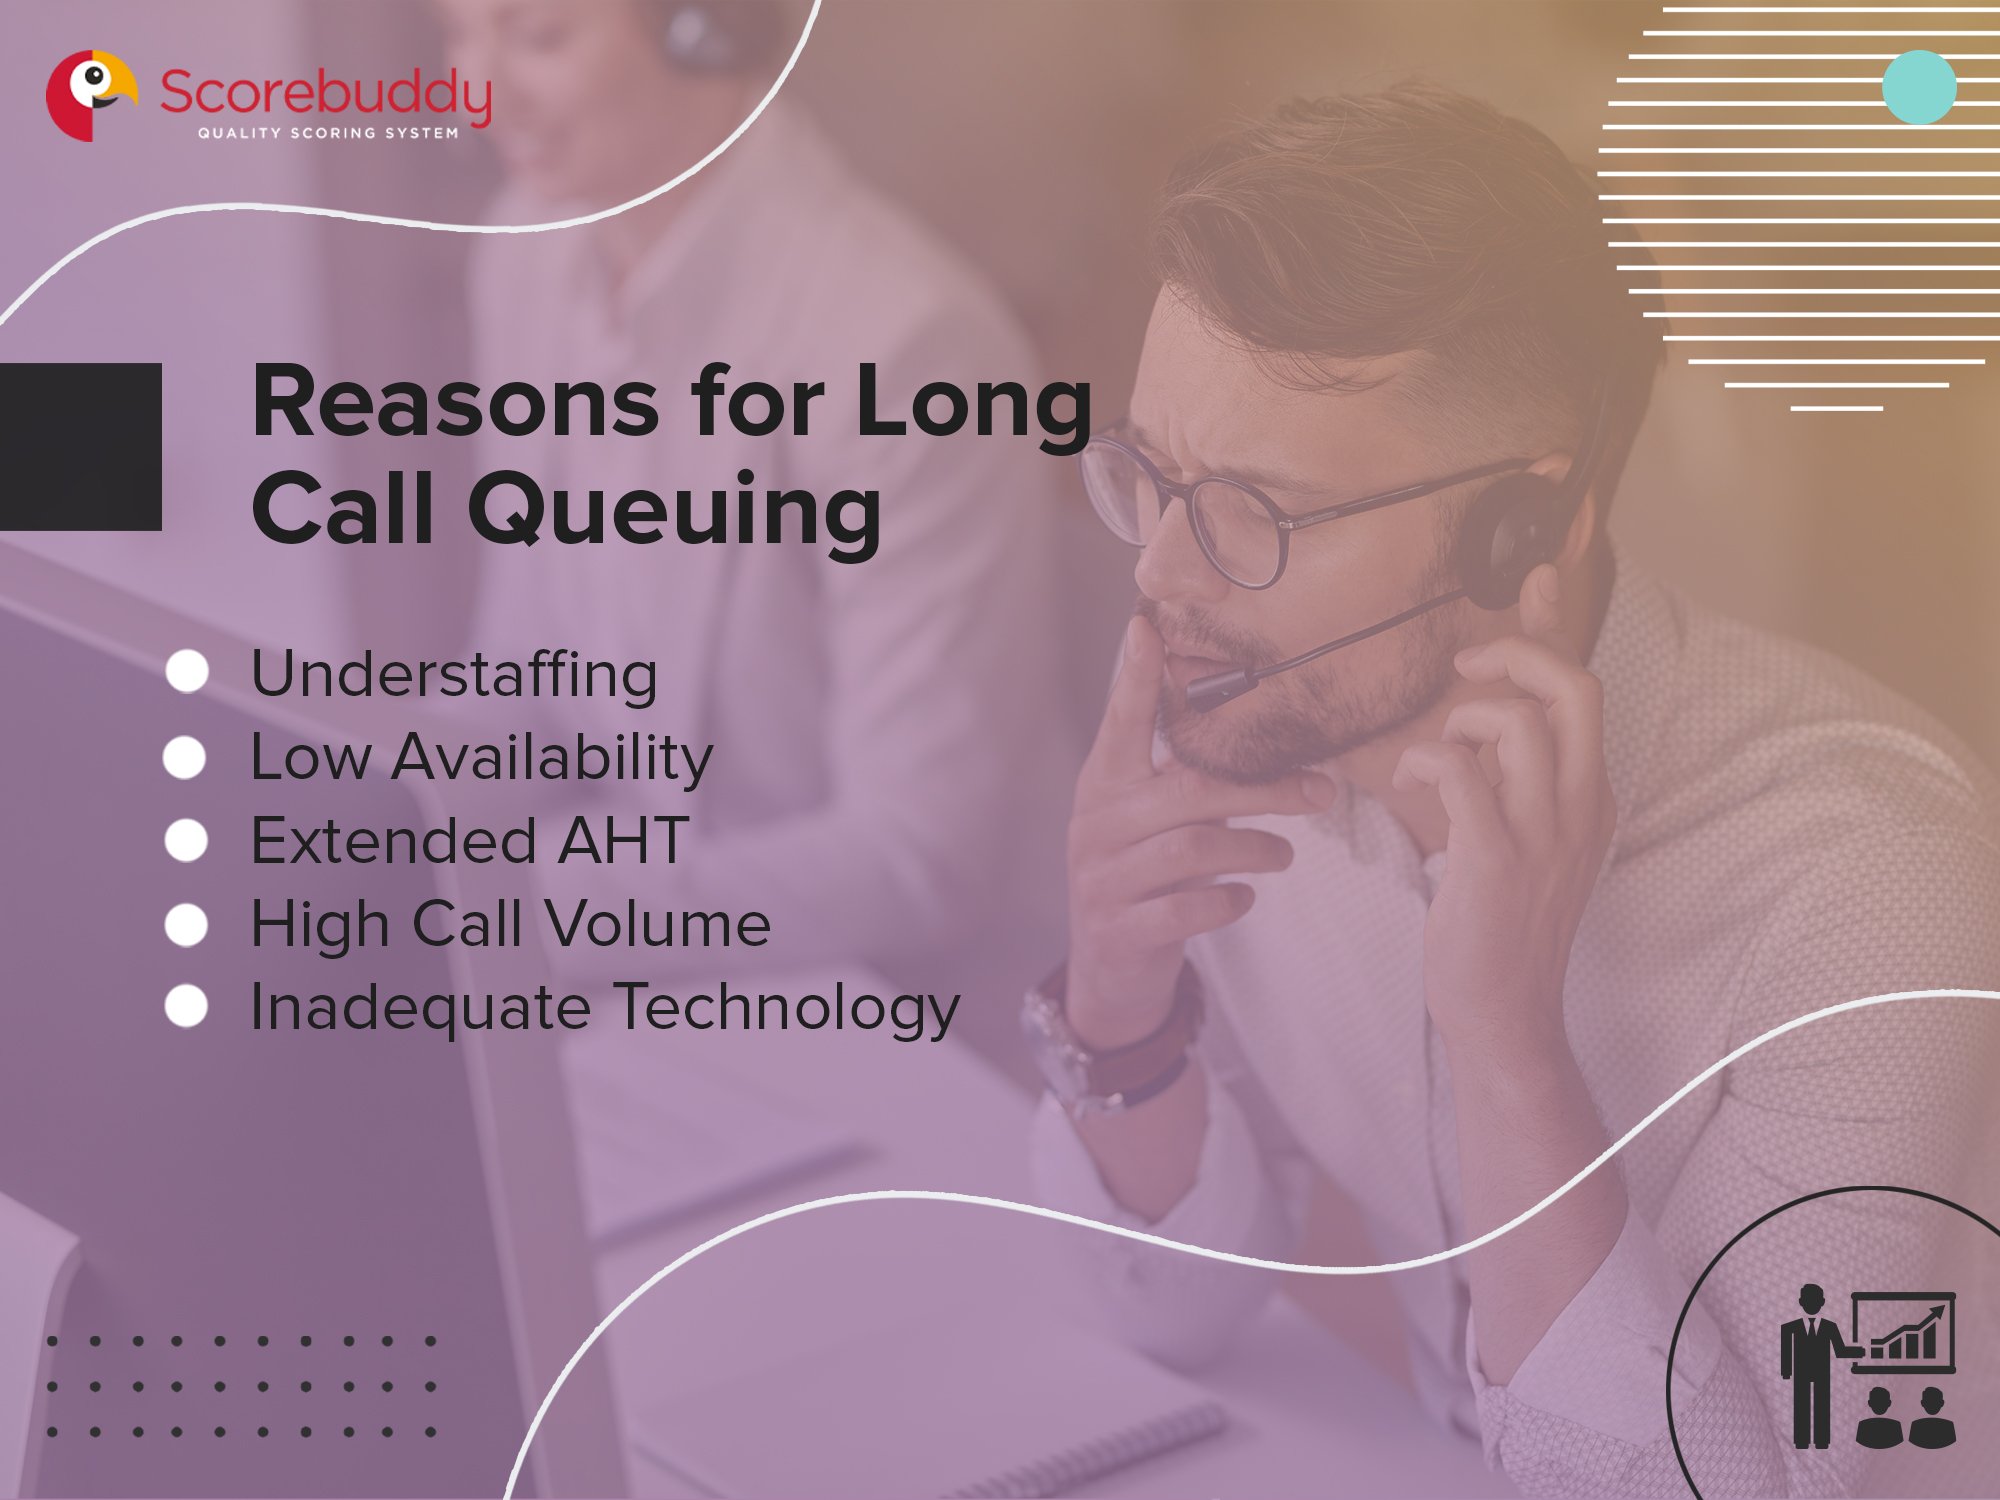 Reasons for long call queuing - 1